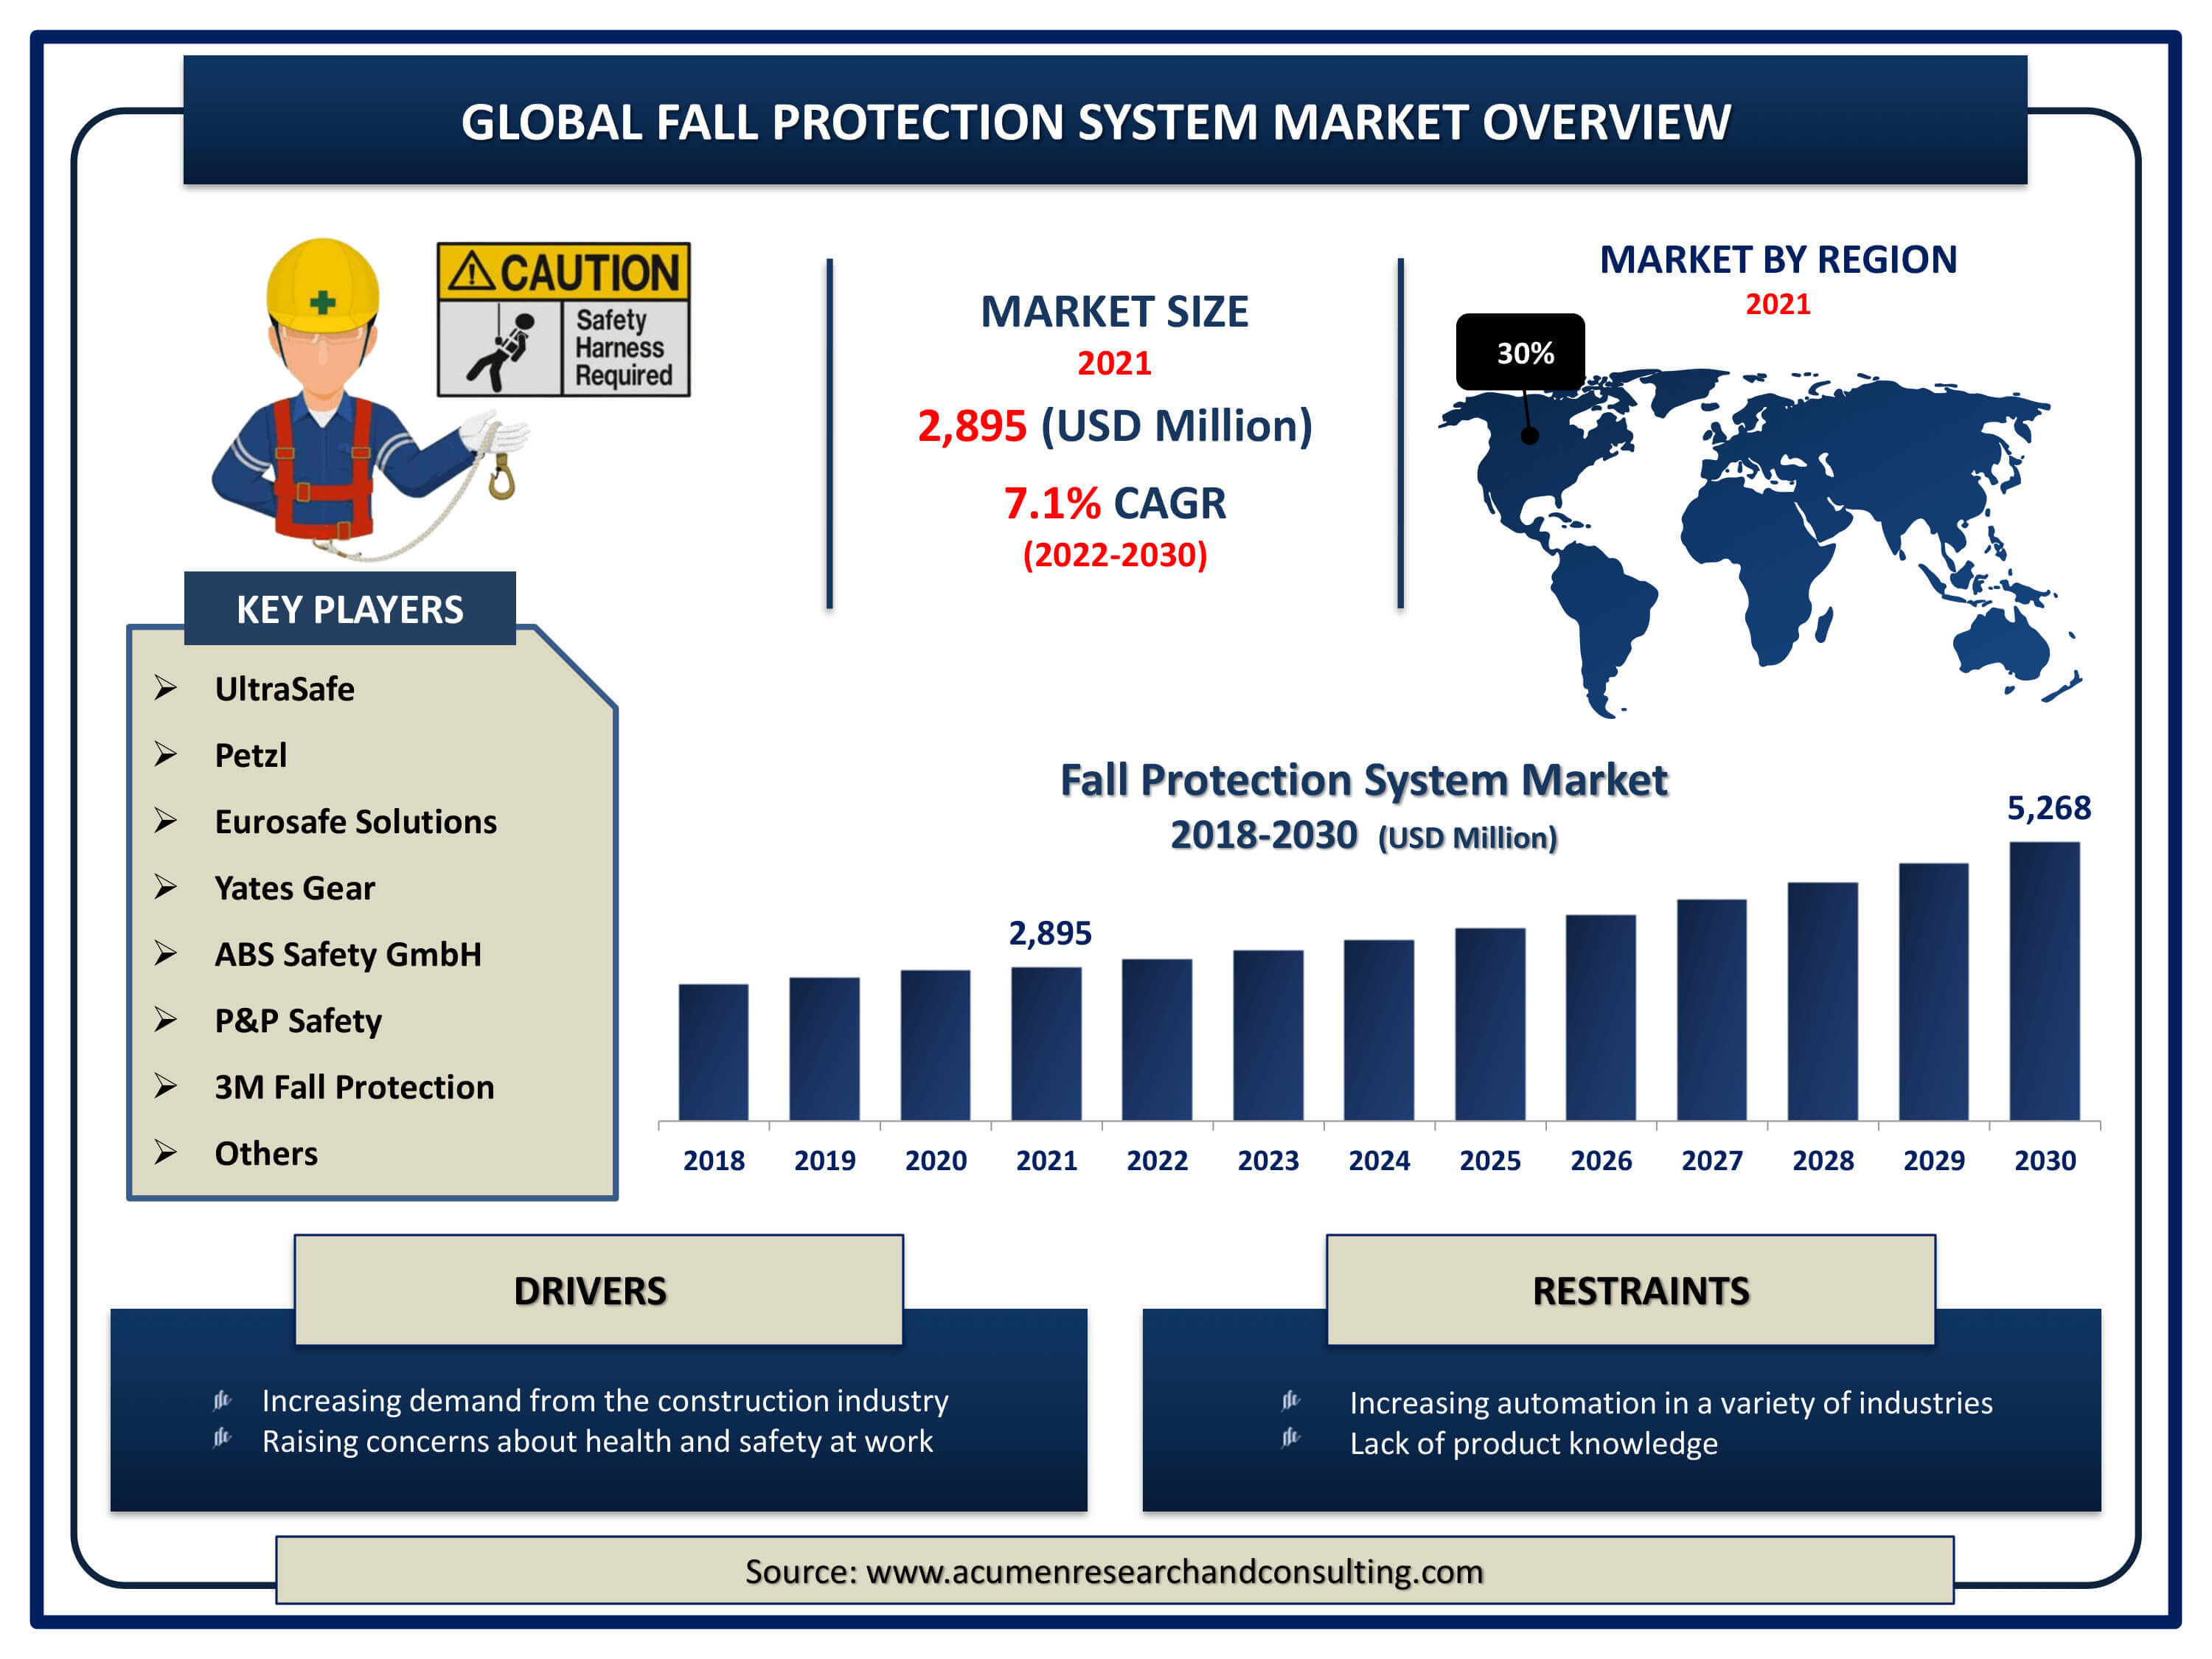 Global fall protection system market revenue is estimated to expand by USD 5,268 million by 2030, with a 7.1% CAGR from 2022 to 2030.